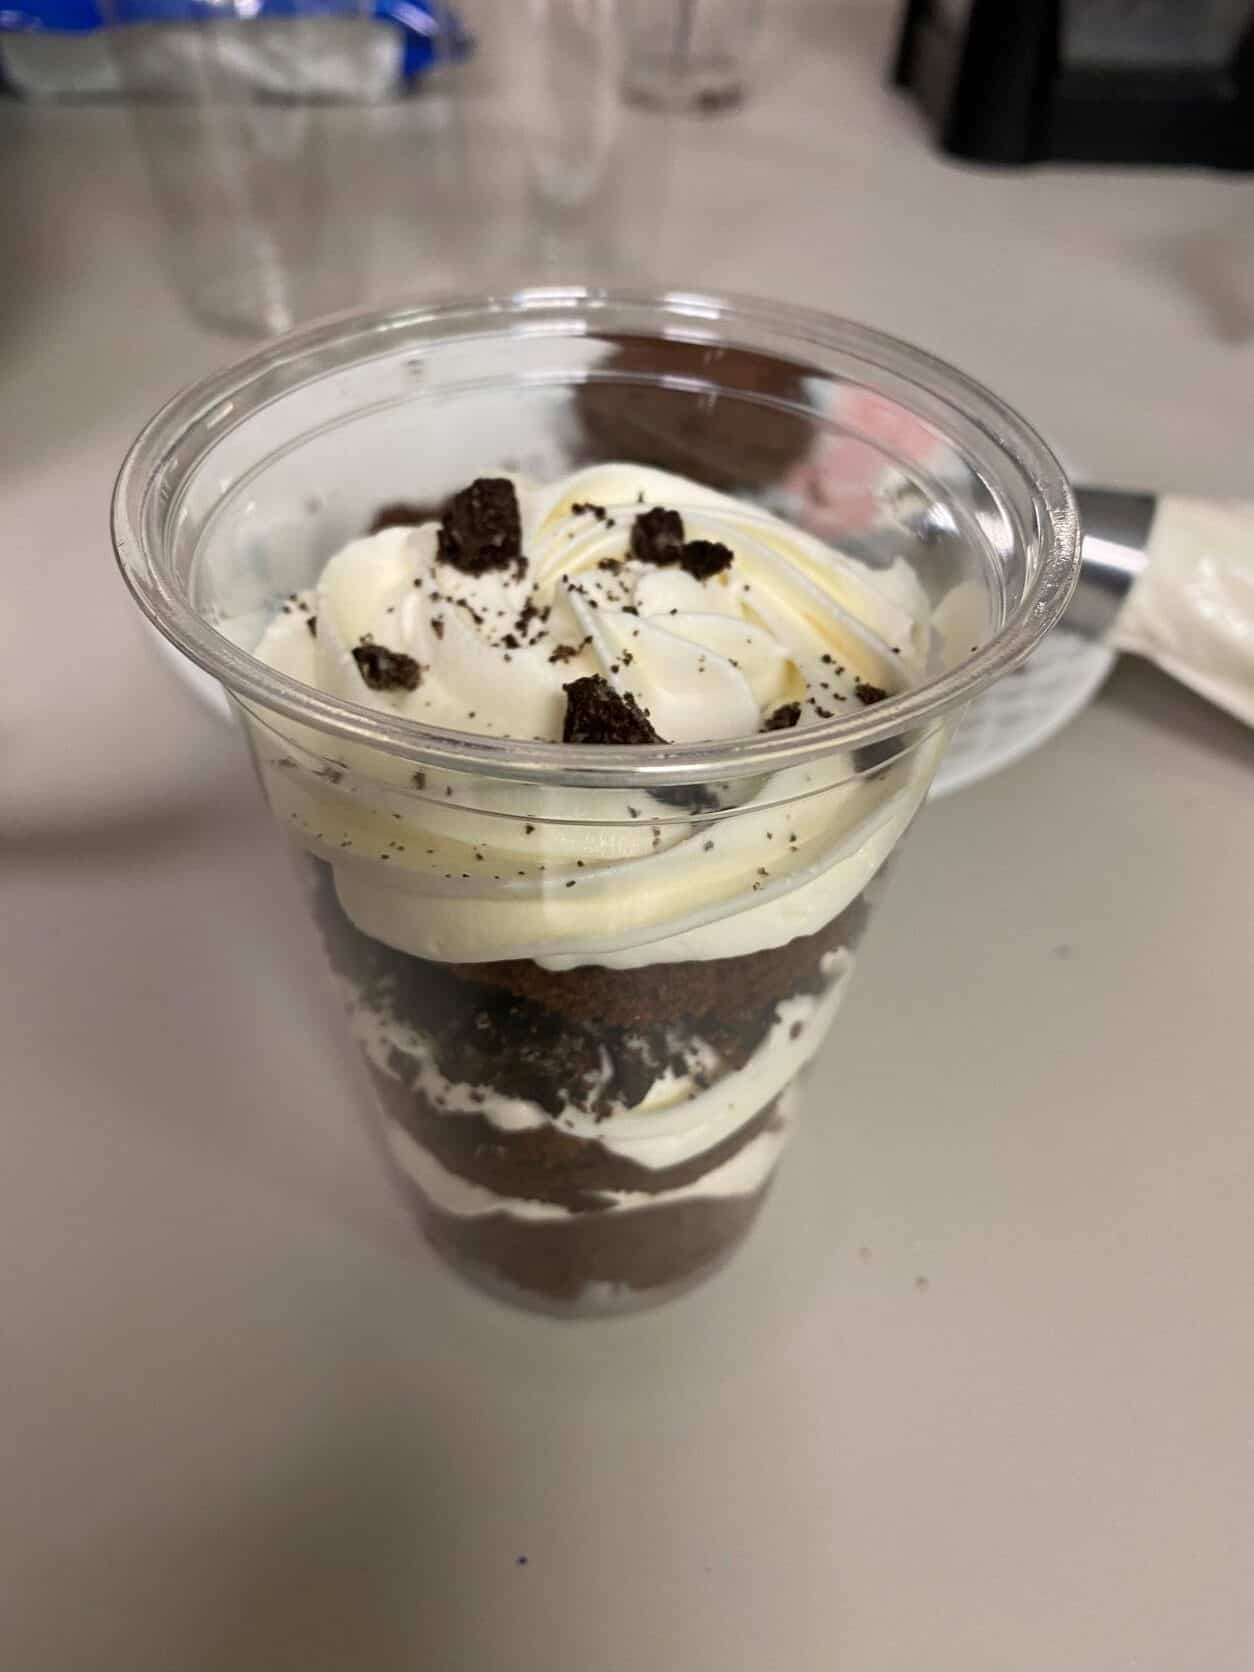 Assembled cookies and cream cup